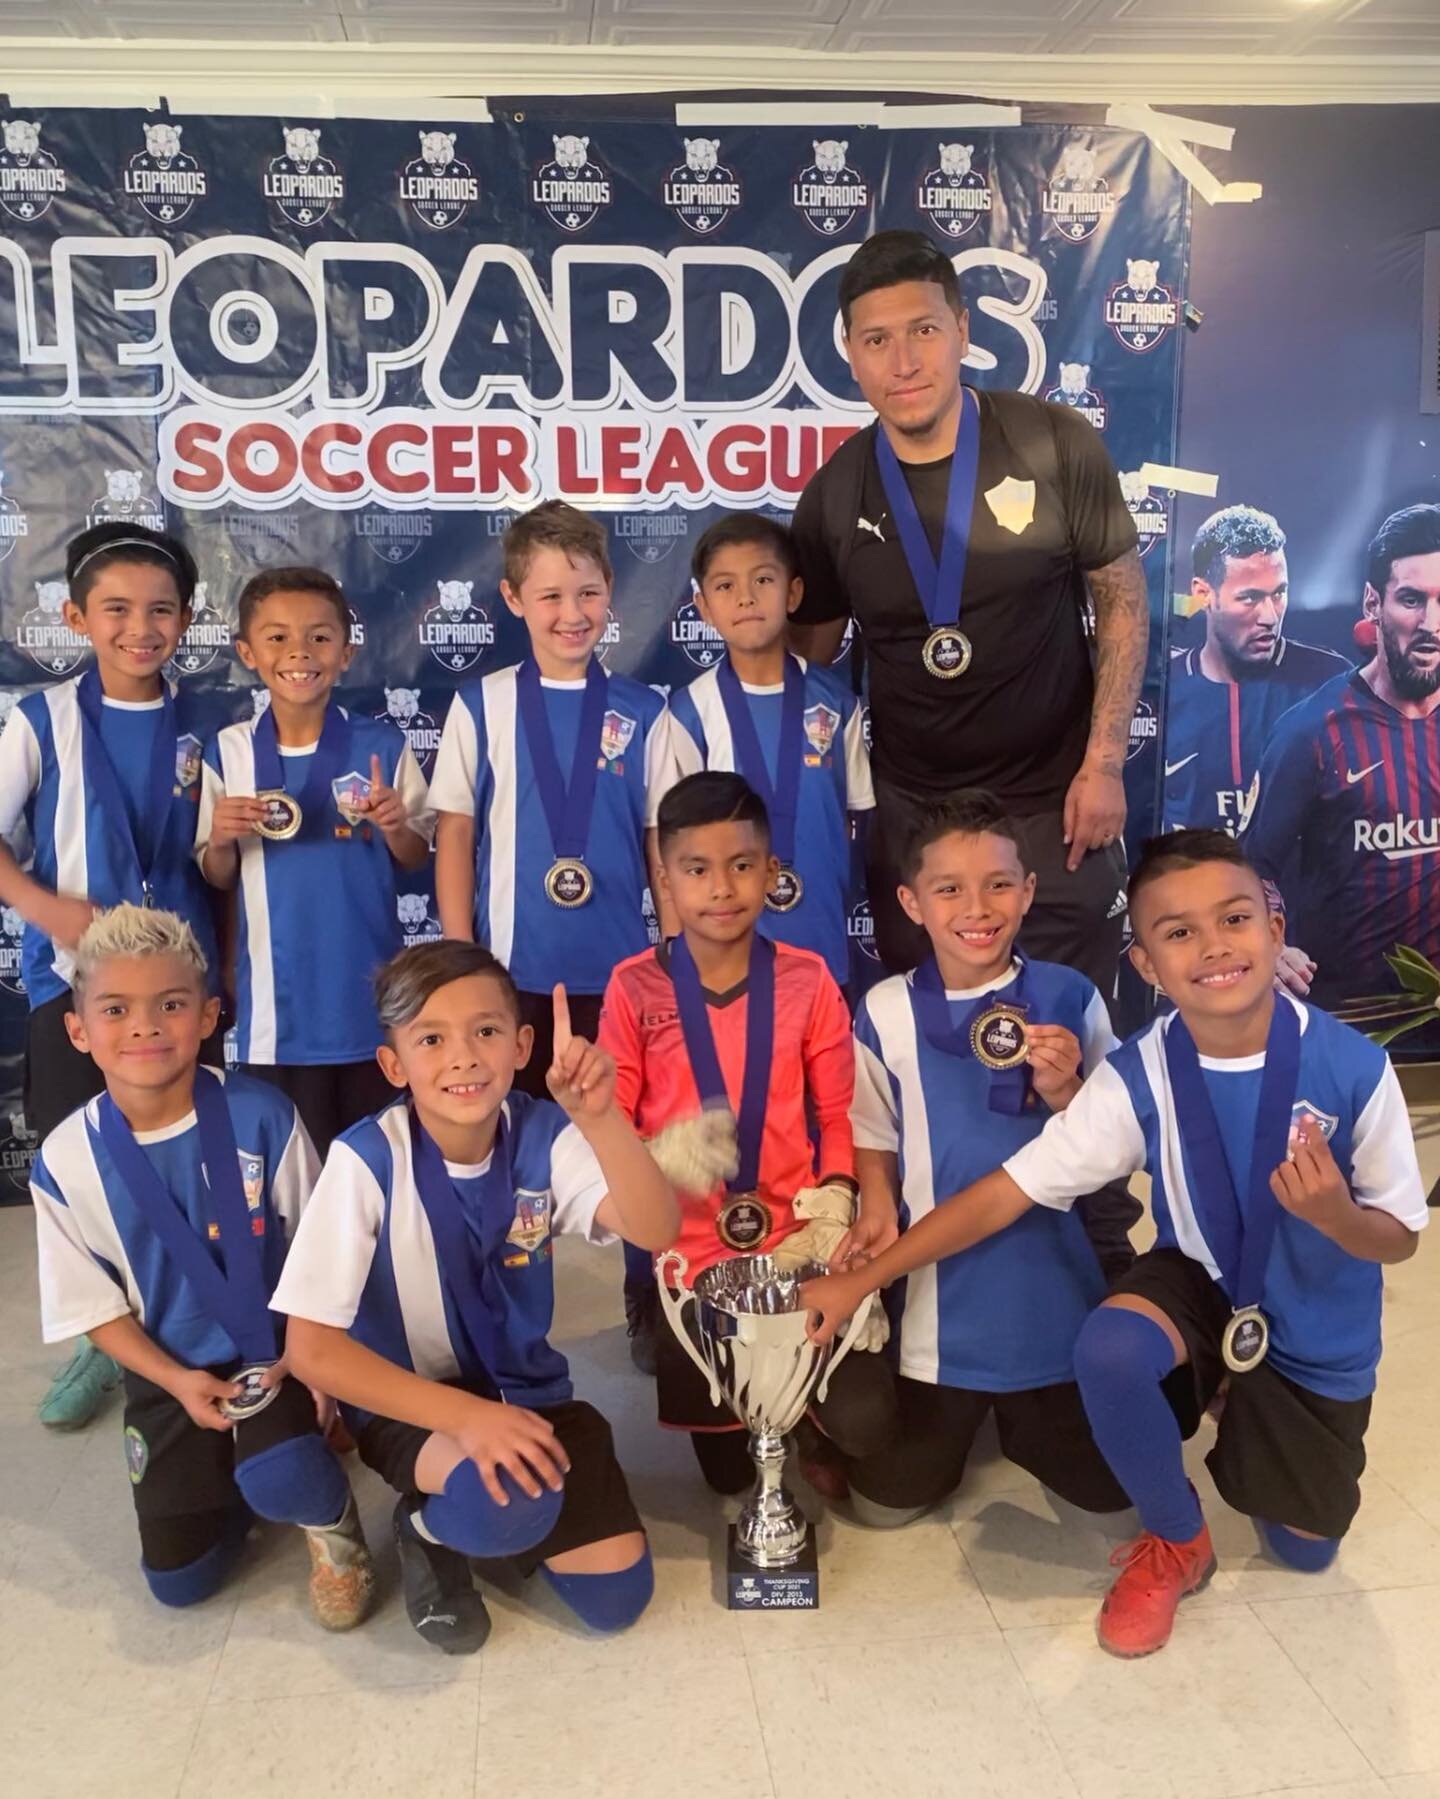 Congratulations to our 2013 &amp; 2012 teams traveling to Spain and Portugal on a great weekend of soccer. Our 2013 dominated their division while our 2012 came out in second place losing the final 1-0.

Our teams participated in the Leopardos Cup in